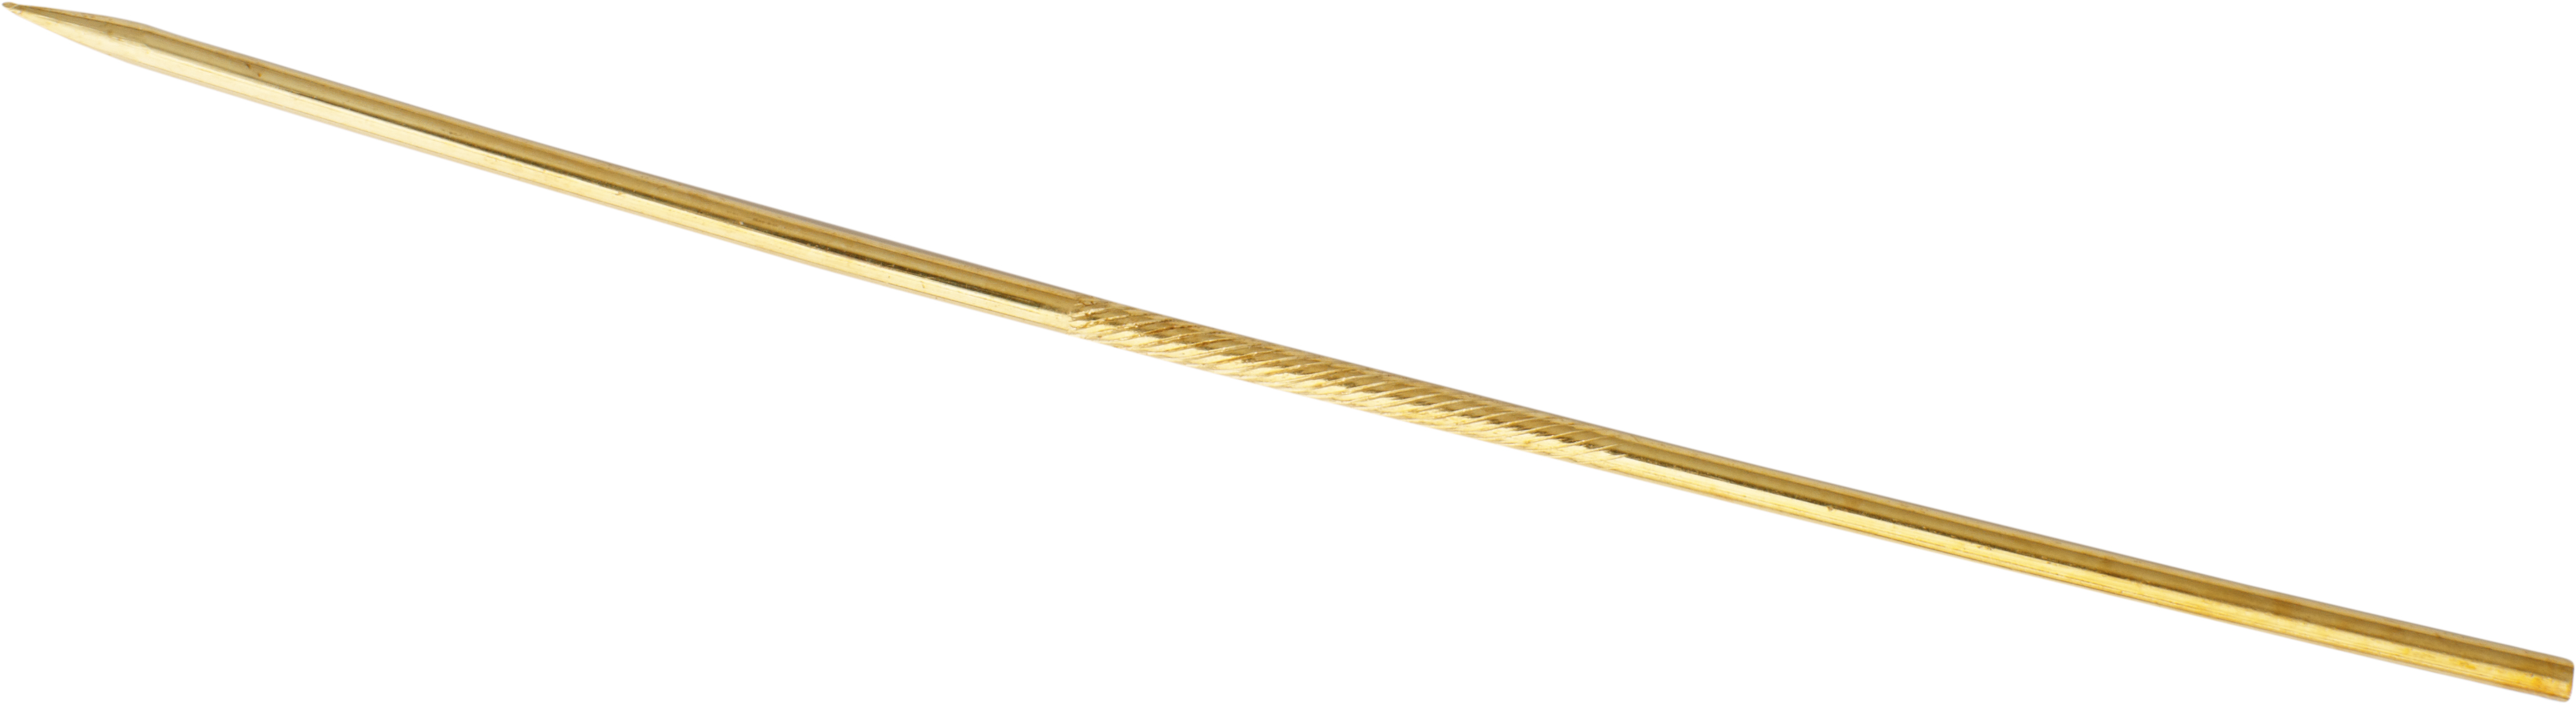 Tie tack gold 750/- Gg length 60,00mm , straight